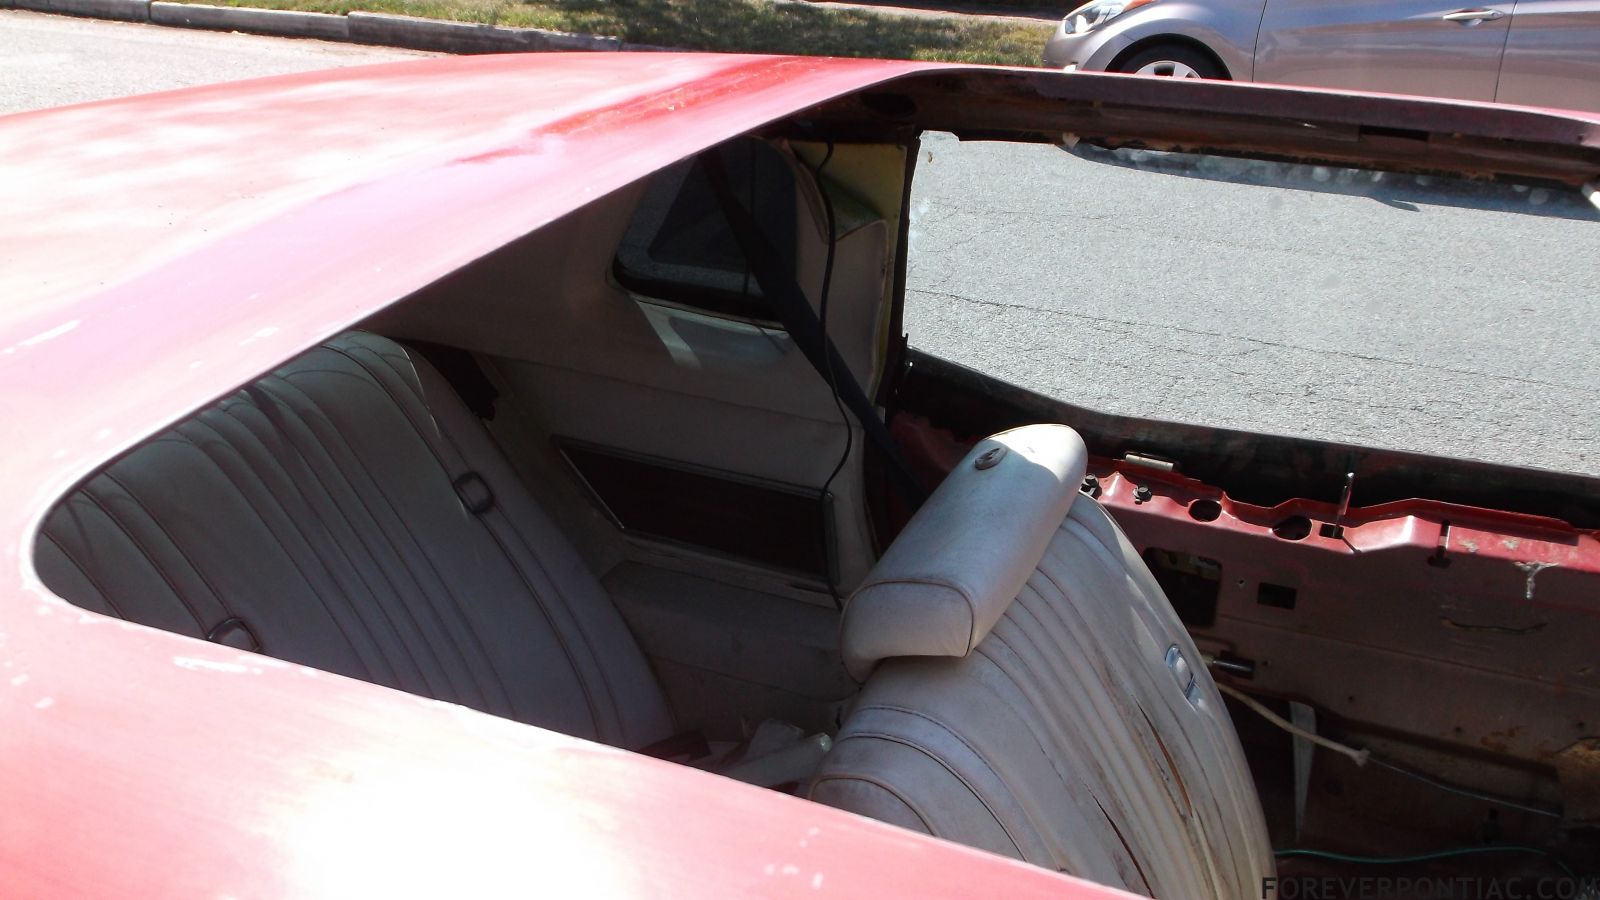 after removing the tape and incorrect sunroof from the prior owner